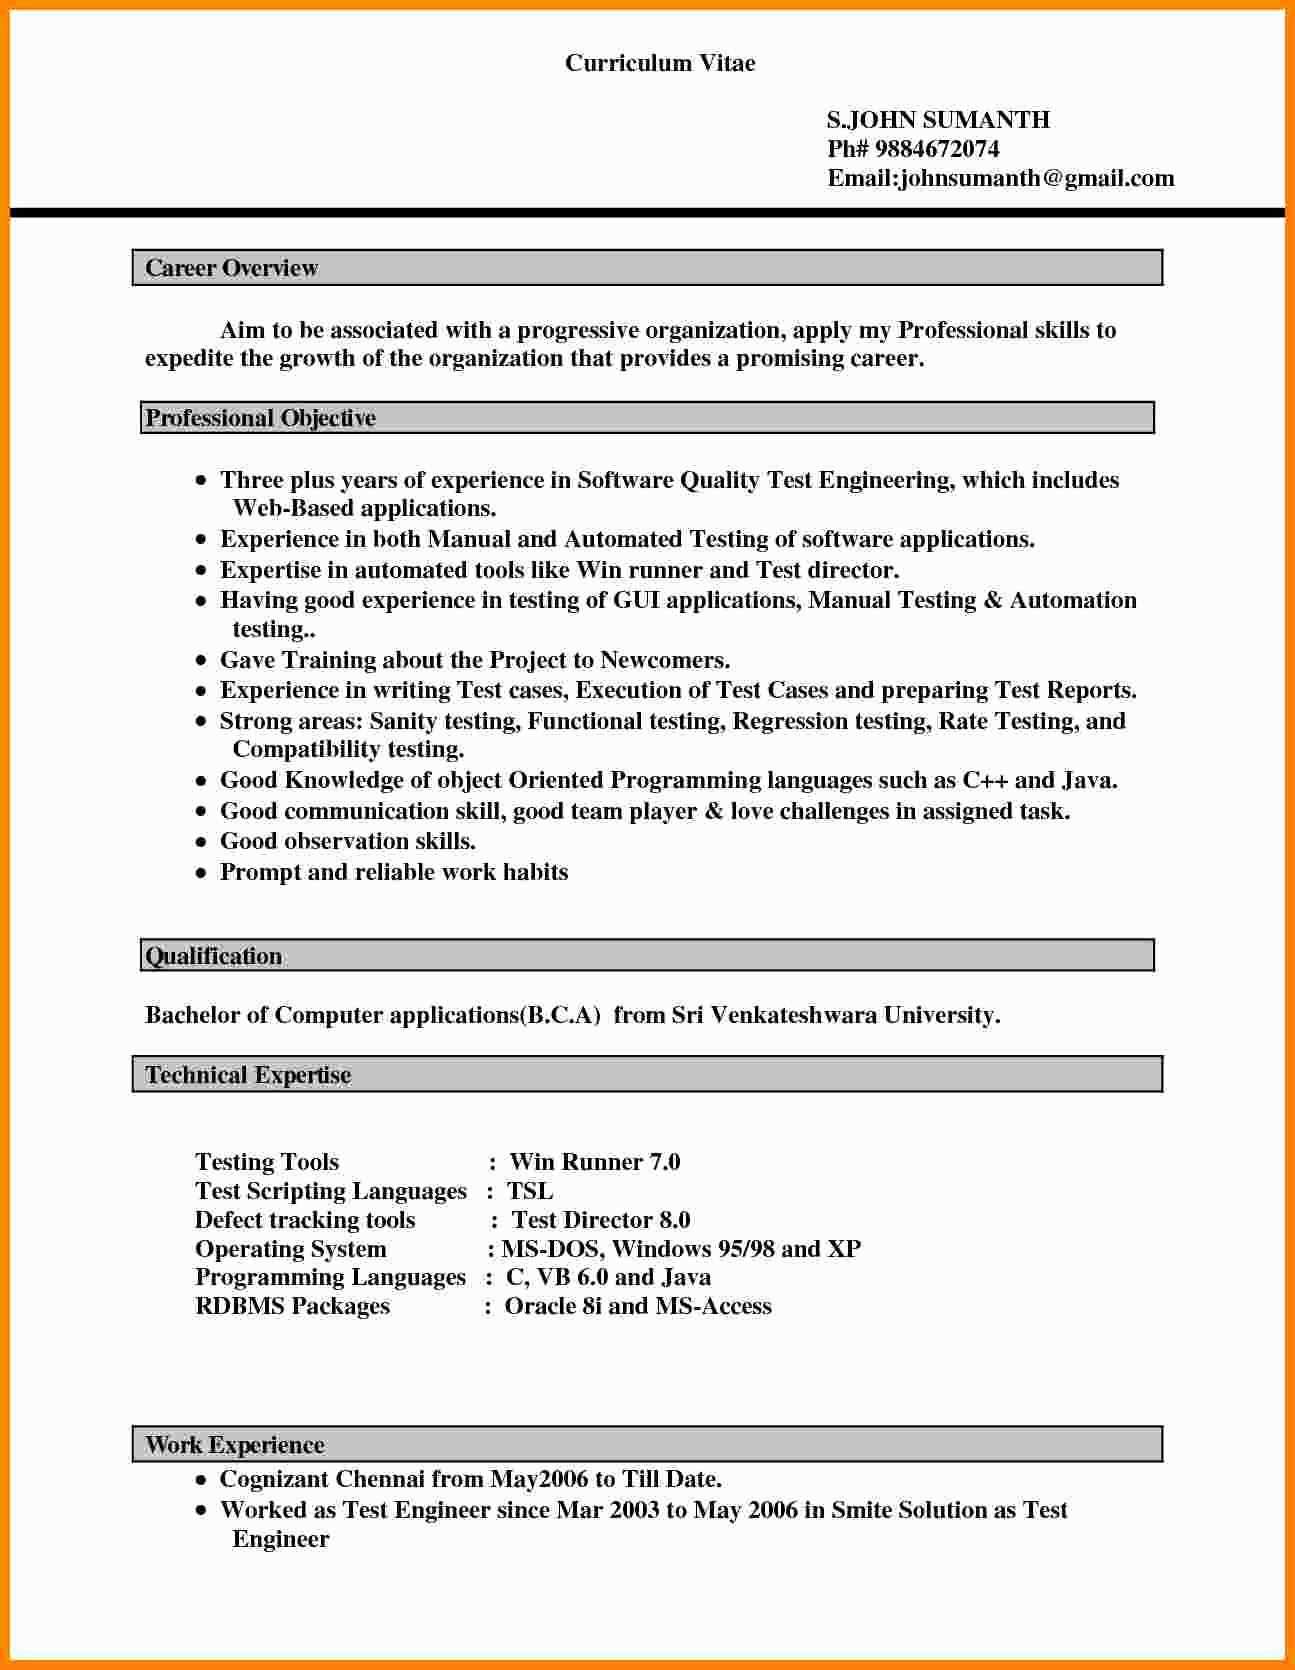 Microsoft Office Resume Templates Best Of 13 Cv Resume Template Microsoft Word In 2020 Microsoft Word Resume Template Downloadable Resume Template Resume Template Word